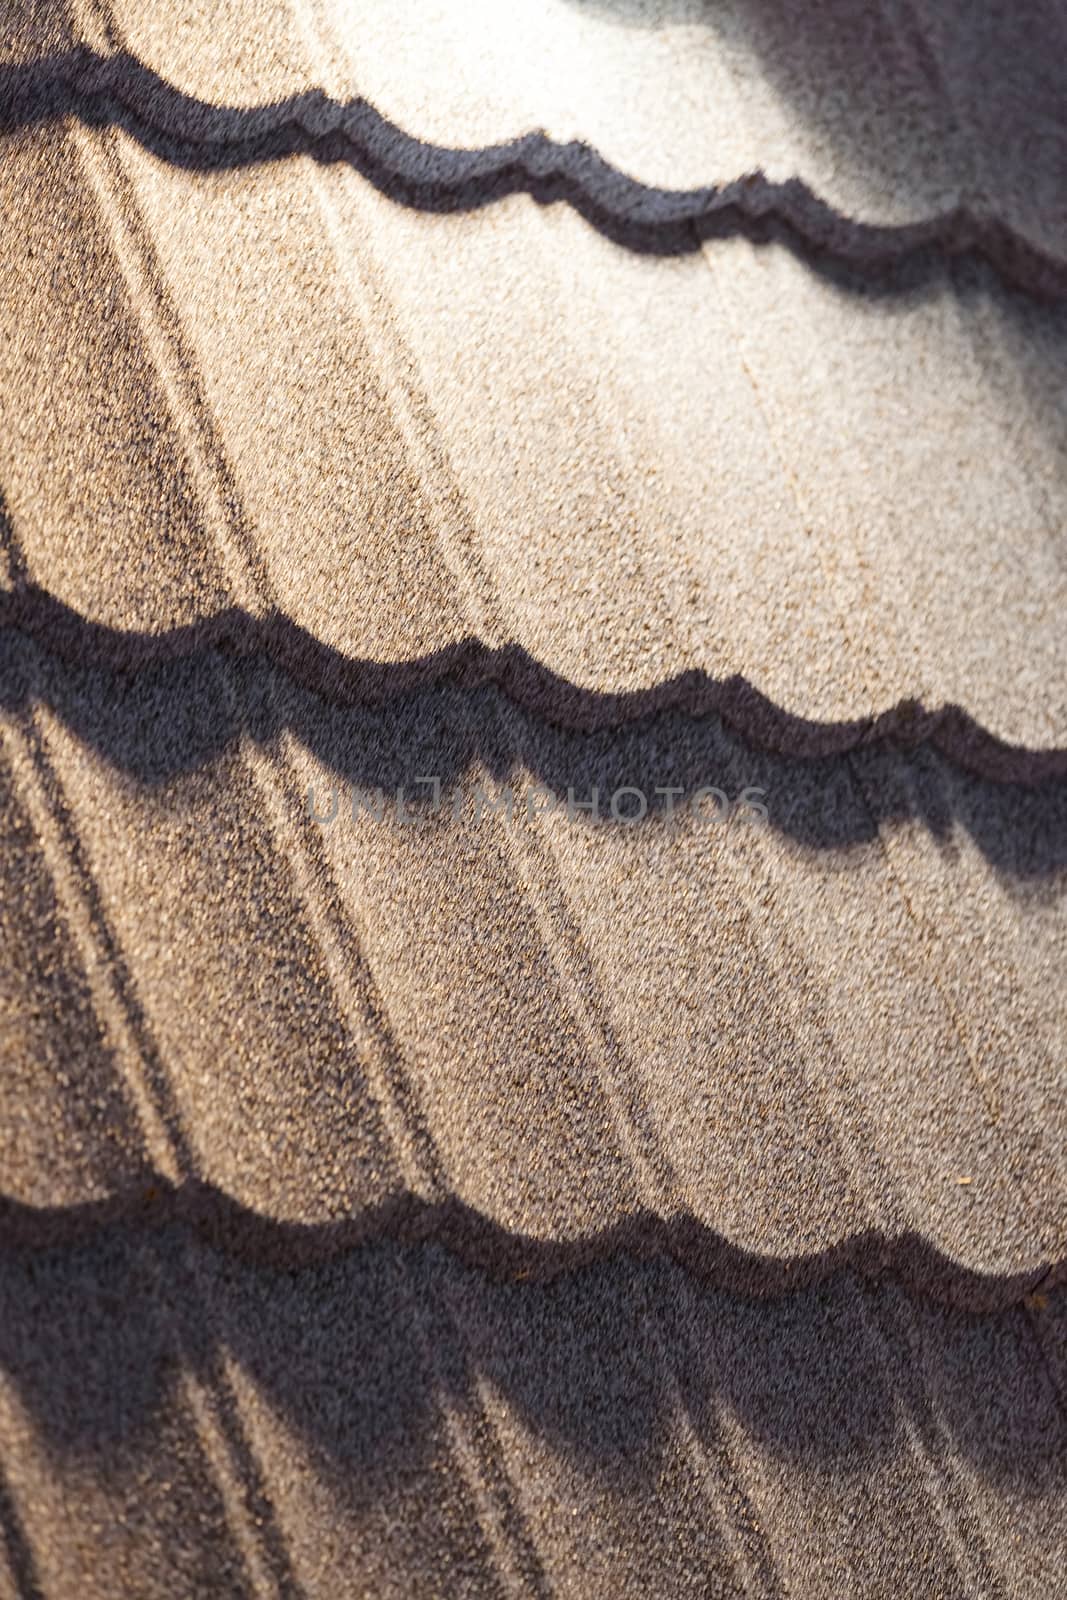 black roof tiles to cover the house, note shallow depth of field